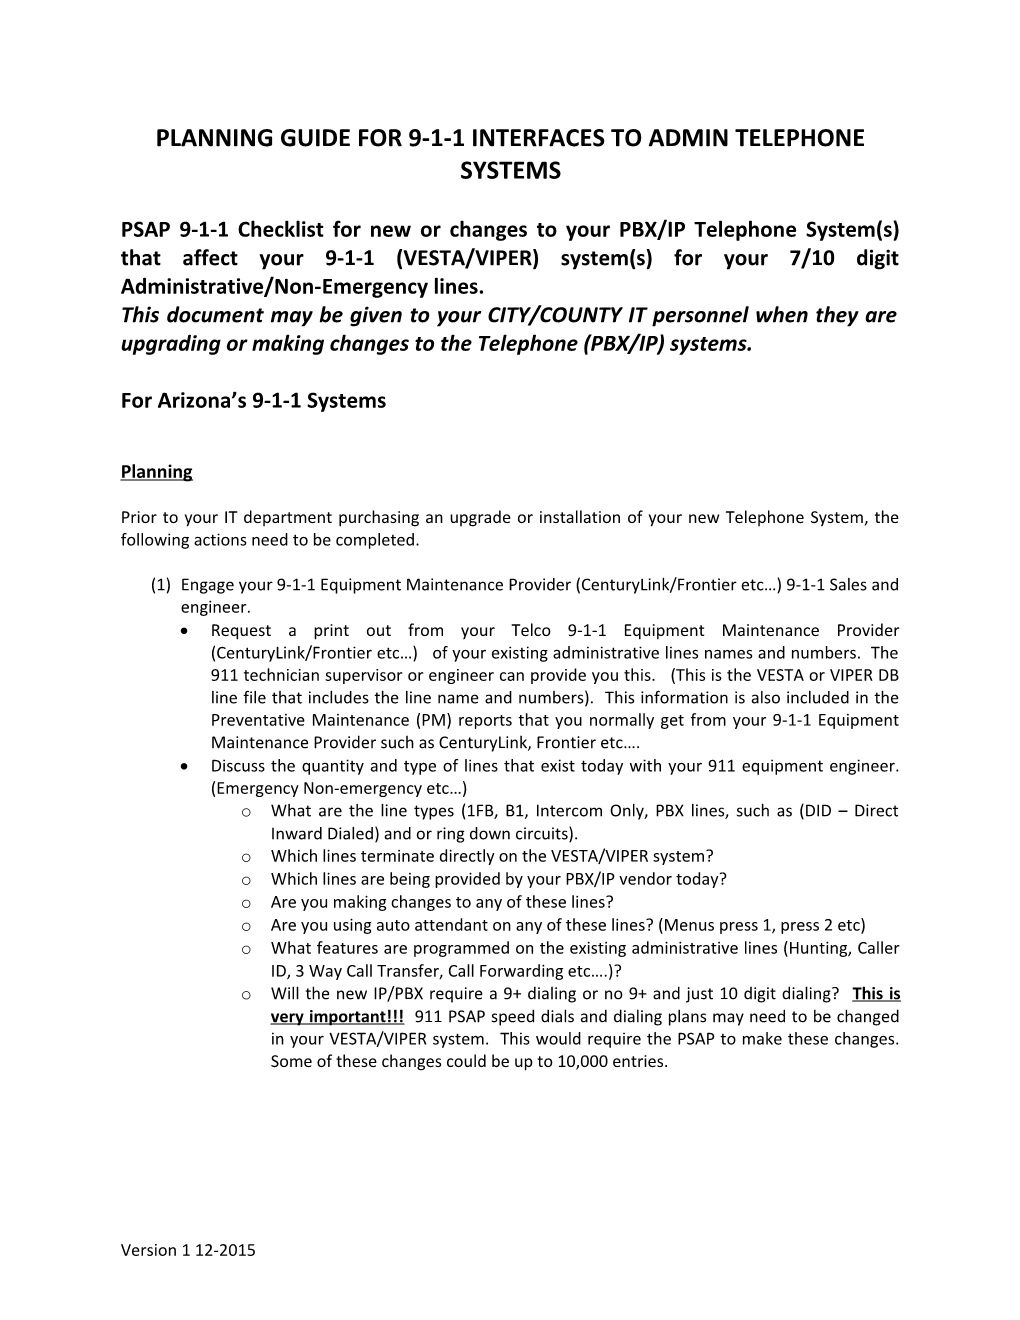 Planning Guide for 9-1-1 Interfaces to Admintelephone Systems